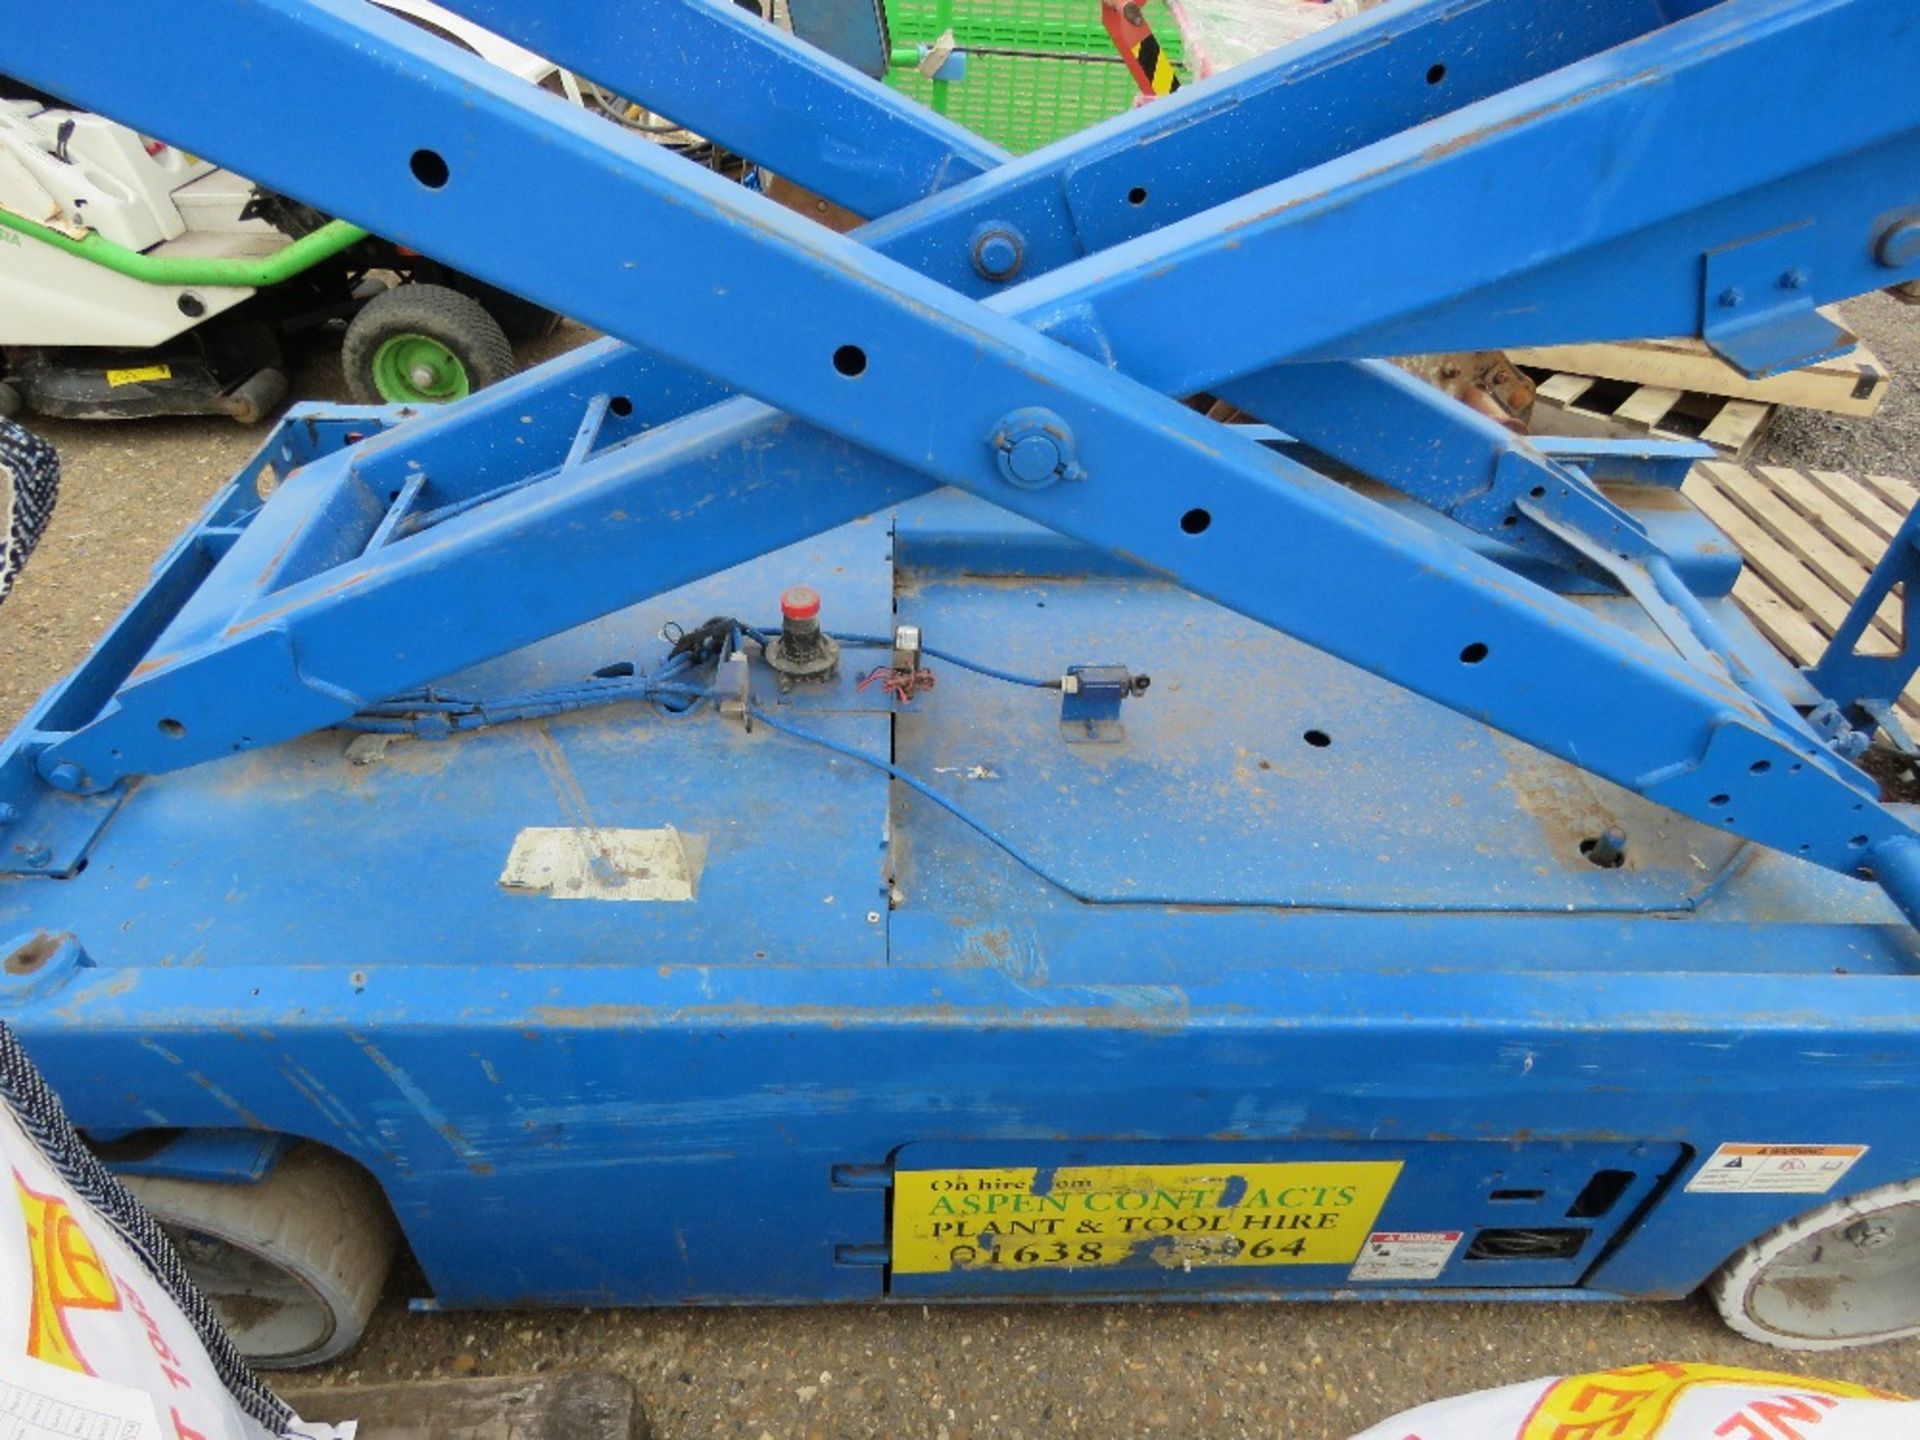 GENIE 2646 BATTERY POWERED SCISSOR ACCESS LIFT. YEAR 2006. DIRECT FROM CONTRACTOR WHO IS DOWNSIZING. - Image 3 of 6